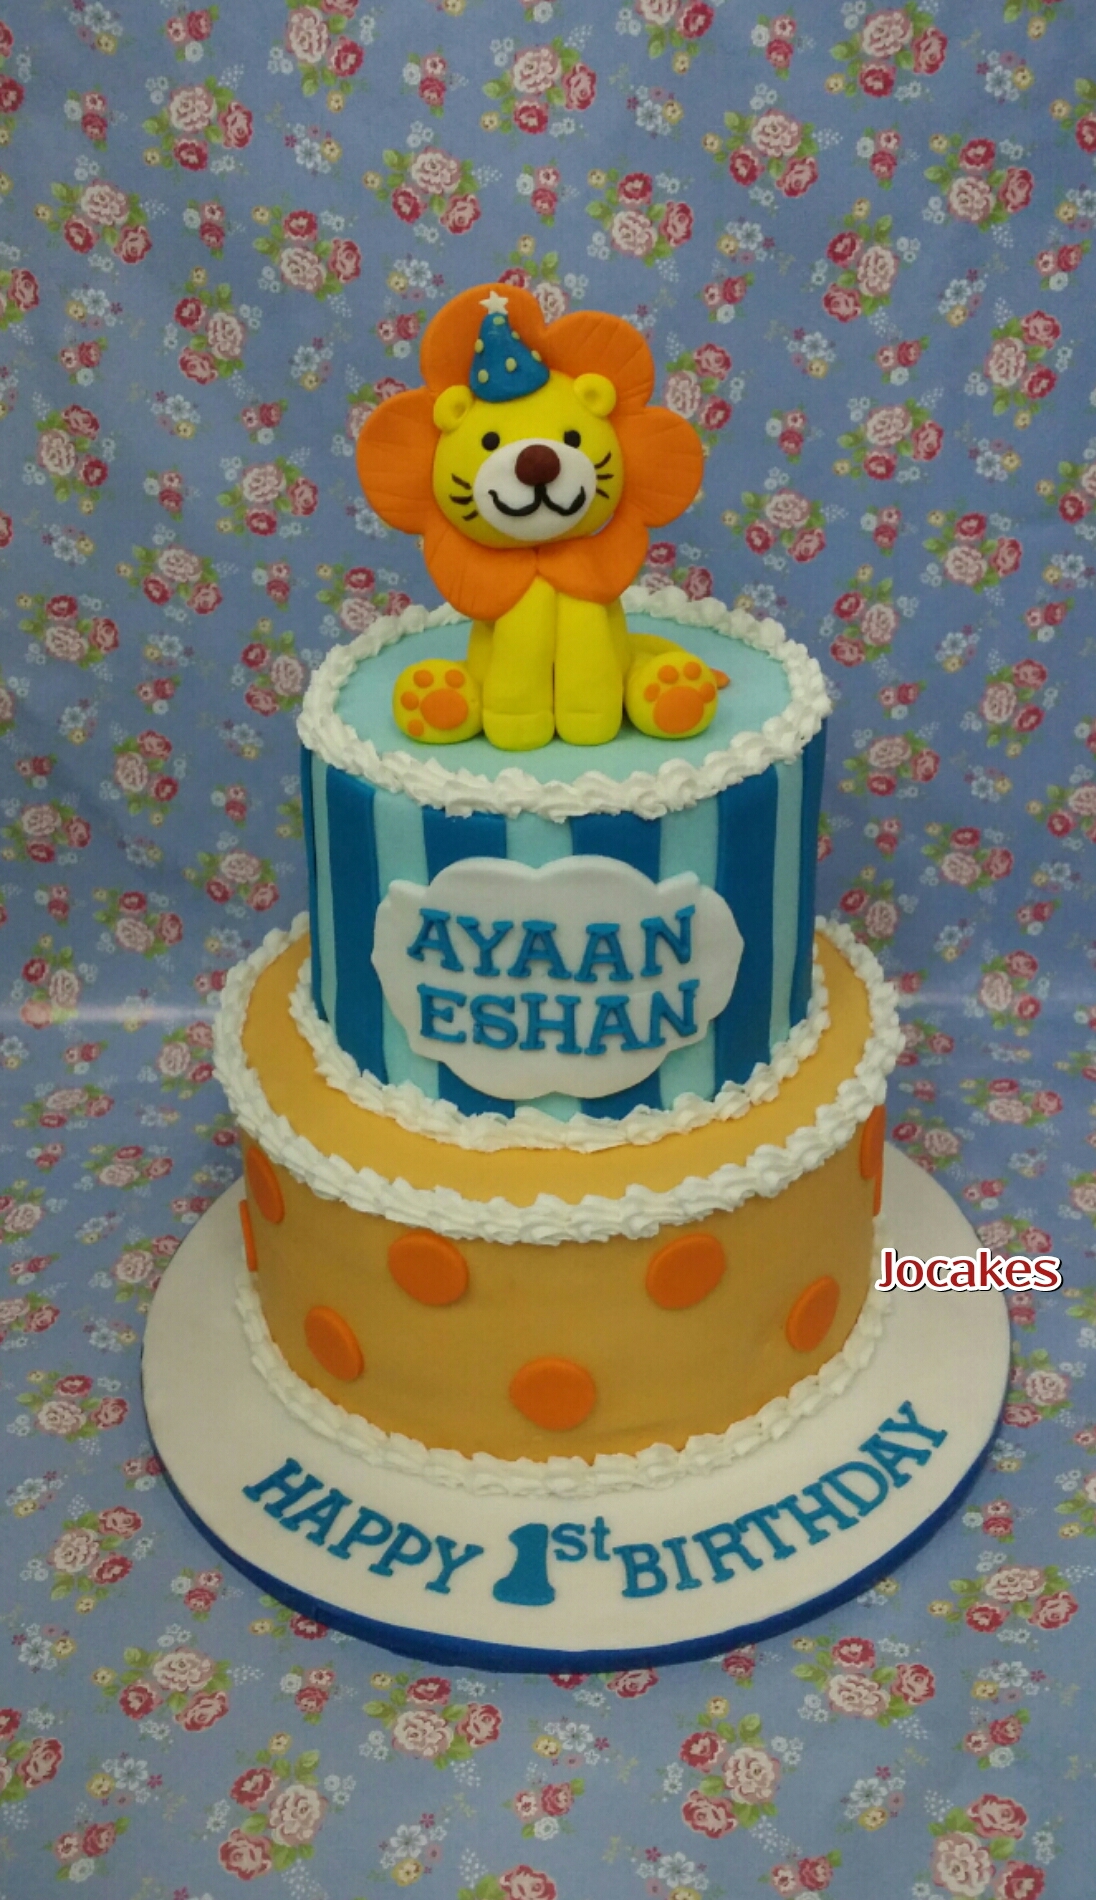 Happy Birthday Ayaan! - Cake 🎂 - Greetings Cards for Birthday for Ayaan -  messageswishesgreetings.com